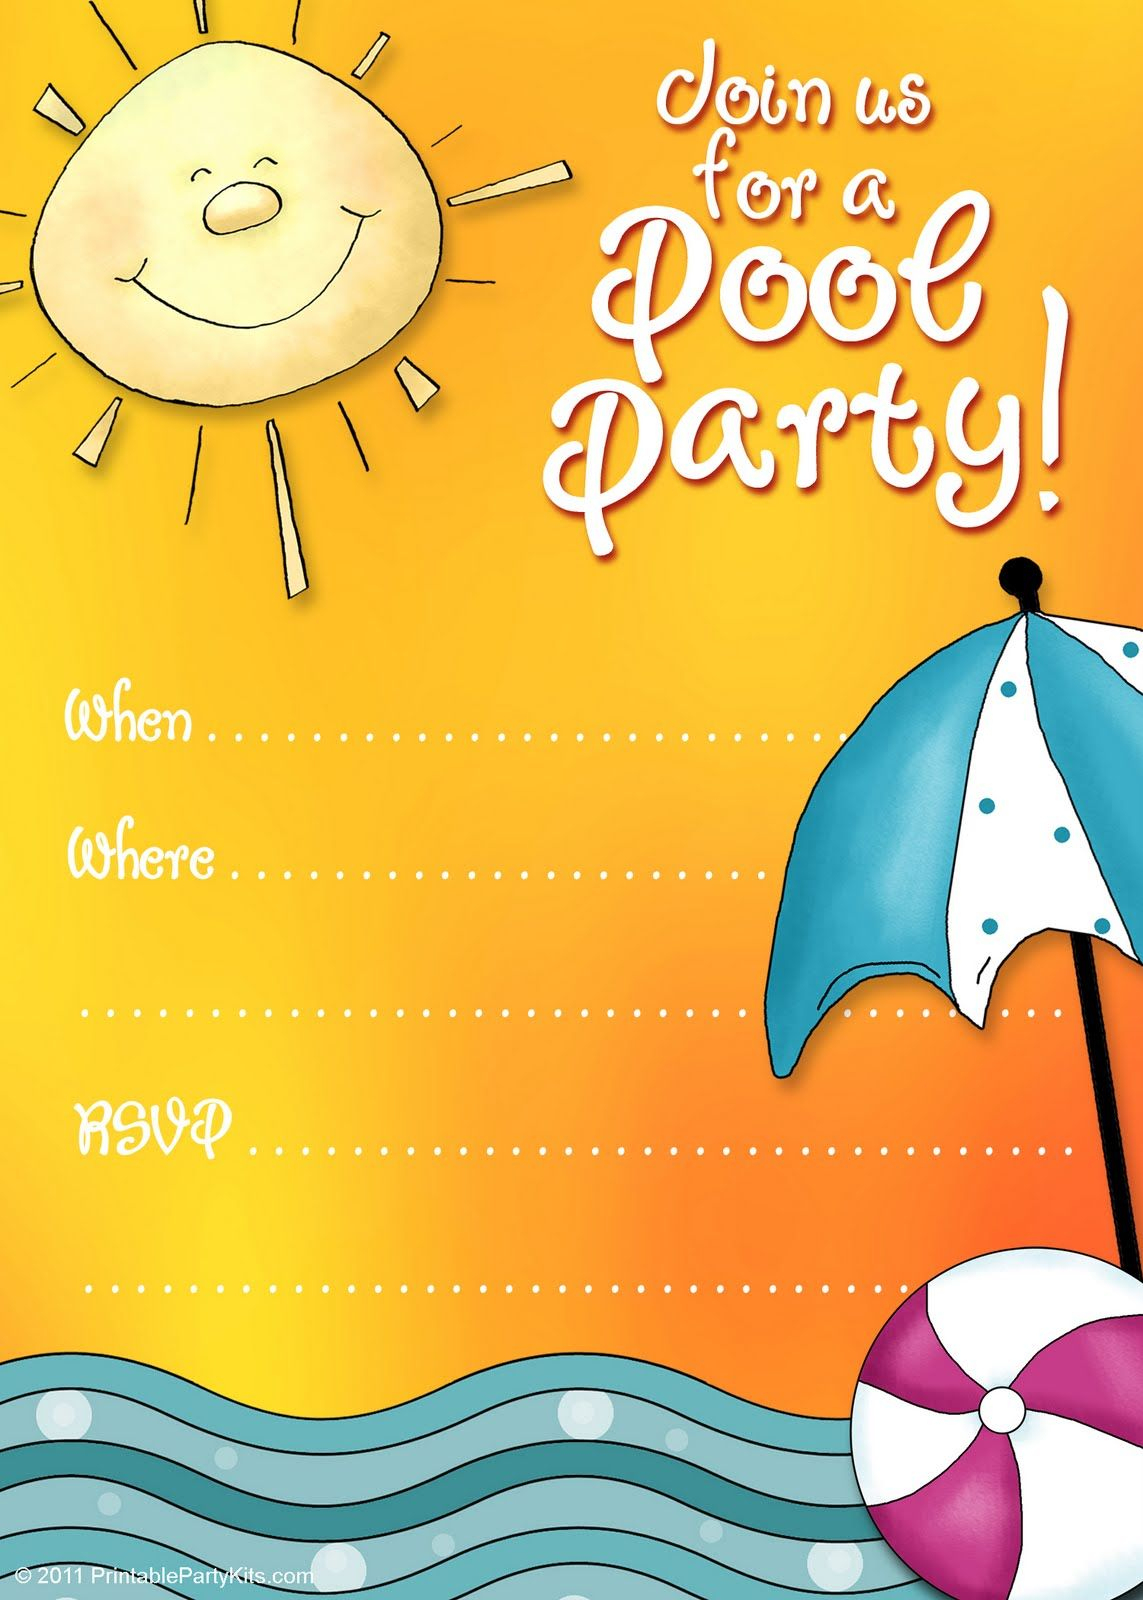 Free Printable Party Invitations: Summer Pool Party Invites - Free Printable Pool Party Invitation Cards